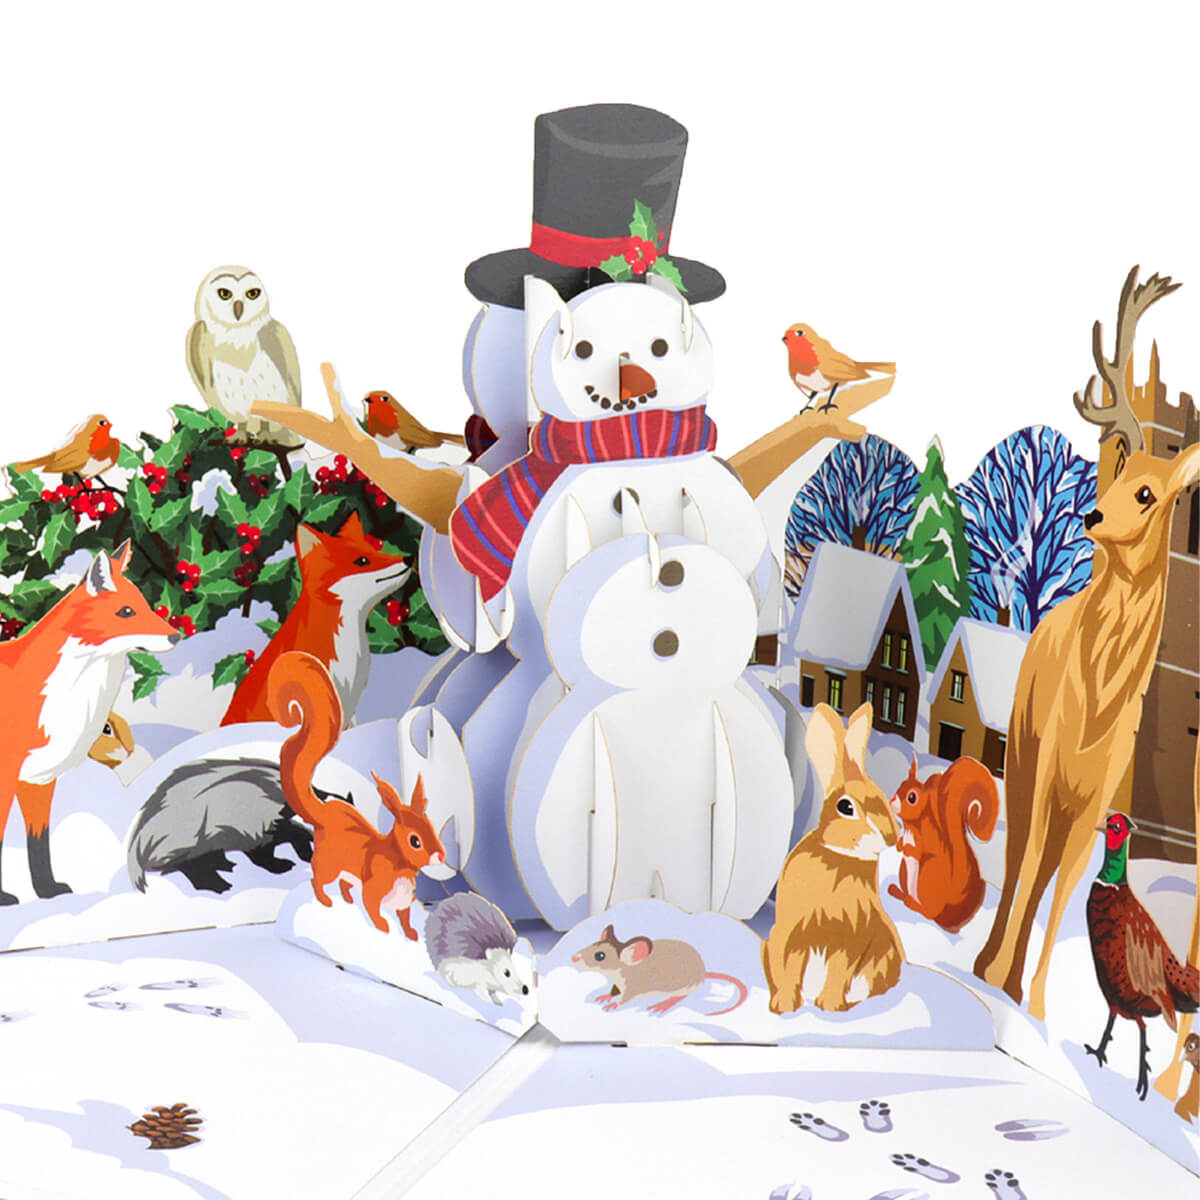 Christmas Pop Up Cards UK Winter Woodland Card featuring a 3D snowman surrounded by British woodland wildlife